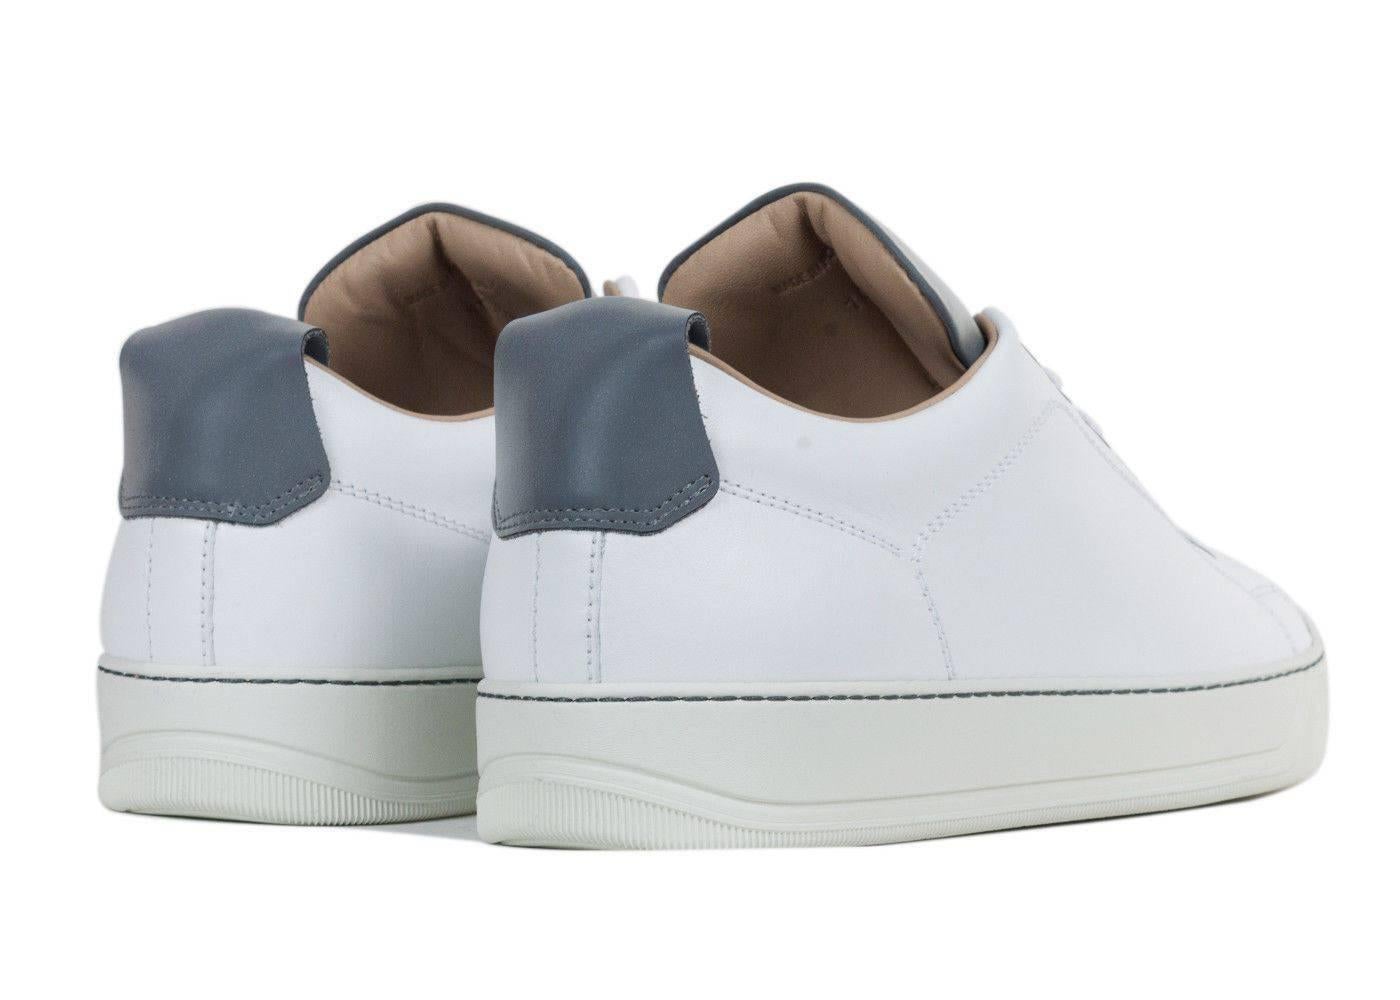 Brand New In Original Box
Retails Online and In-stores for $590
Size UK 6/ US 7  Fits True to Size

The smoothest man in the room definitely owns a pair of Lanvin Cap Toe Sneakers. This modern work of art features a lustrous suede body topped off